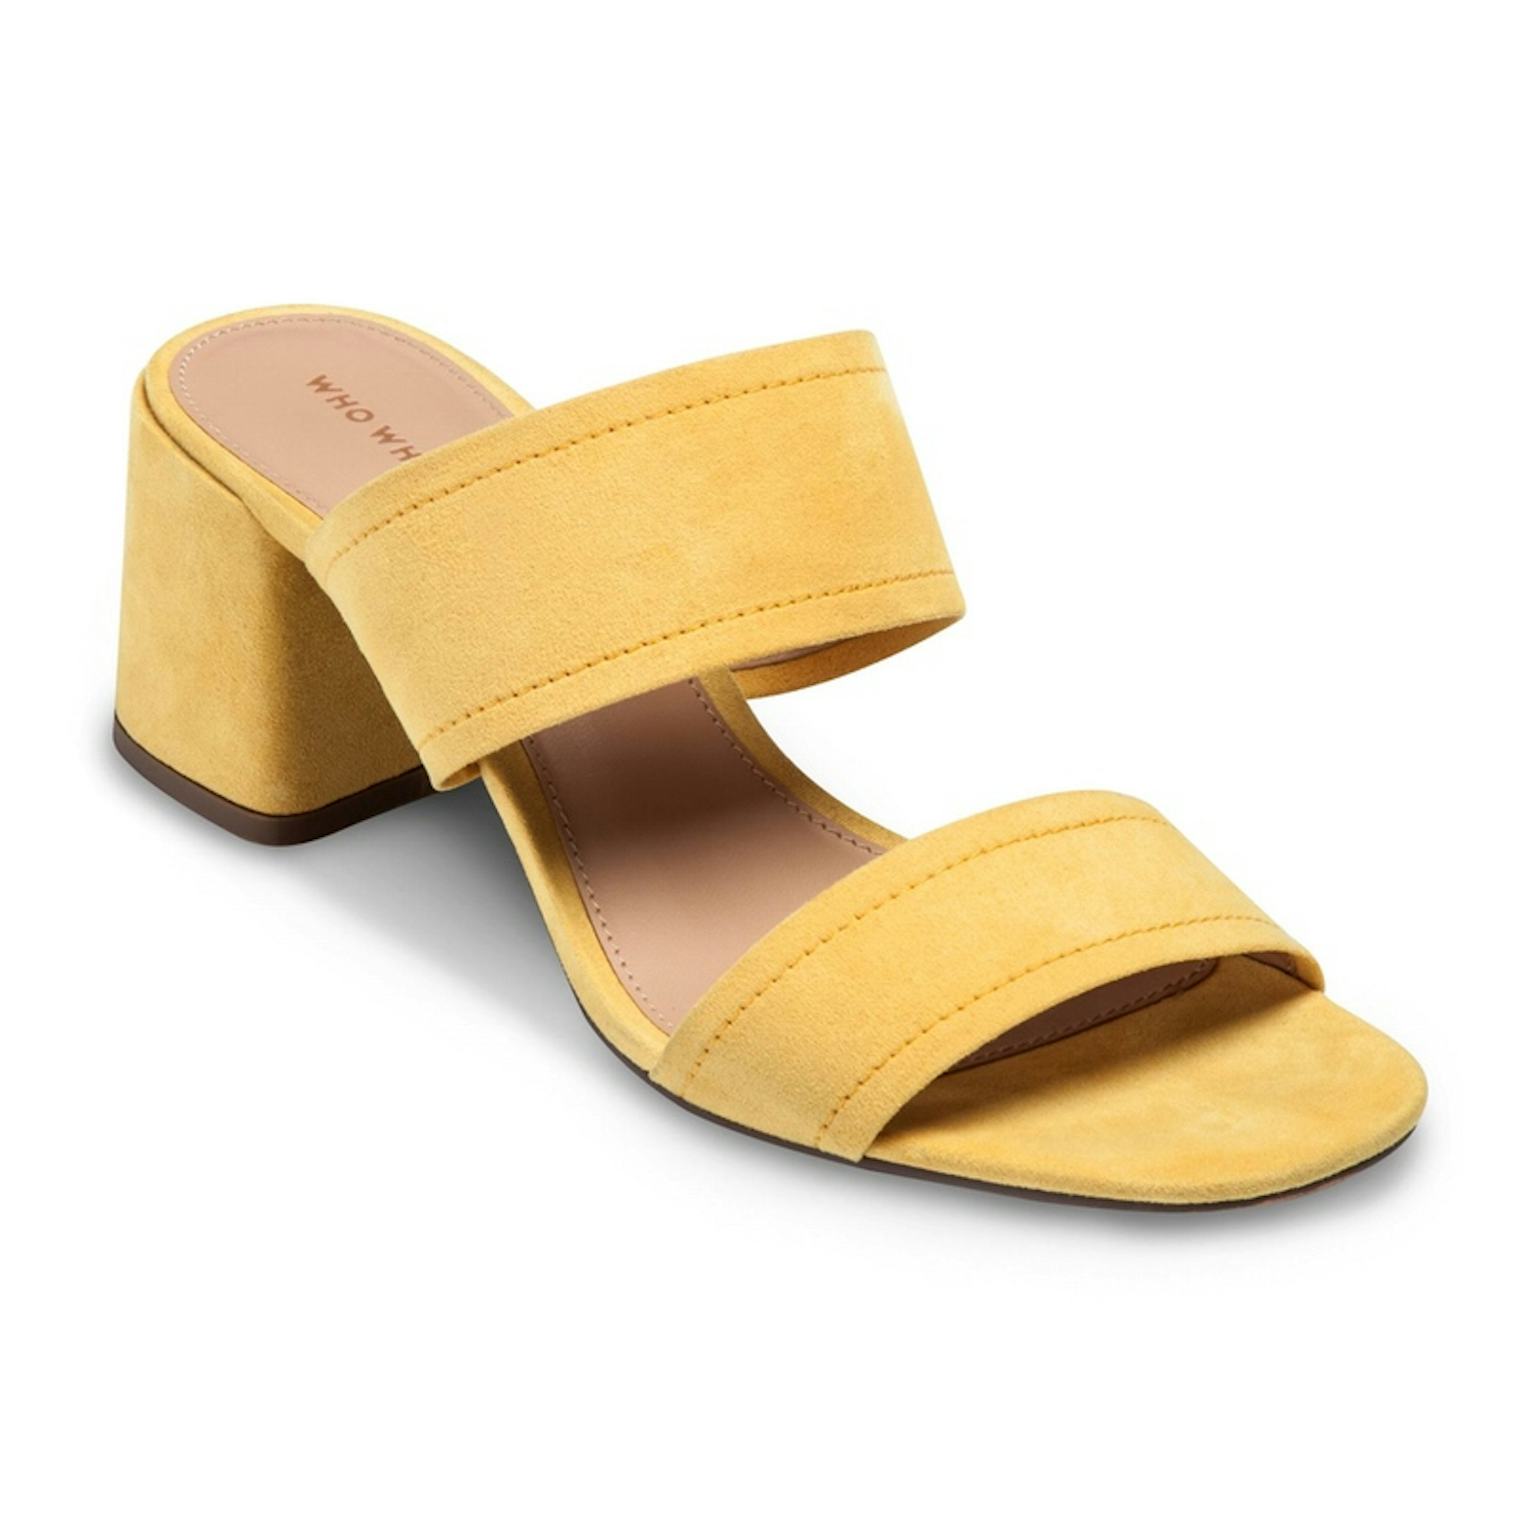 The Most Stylish Sandals To Buy At Target Right Now